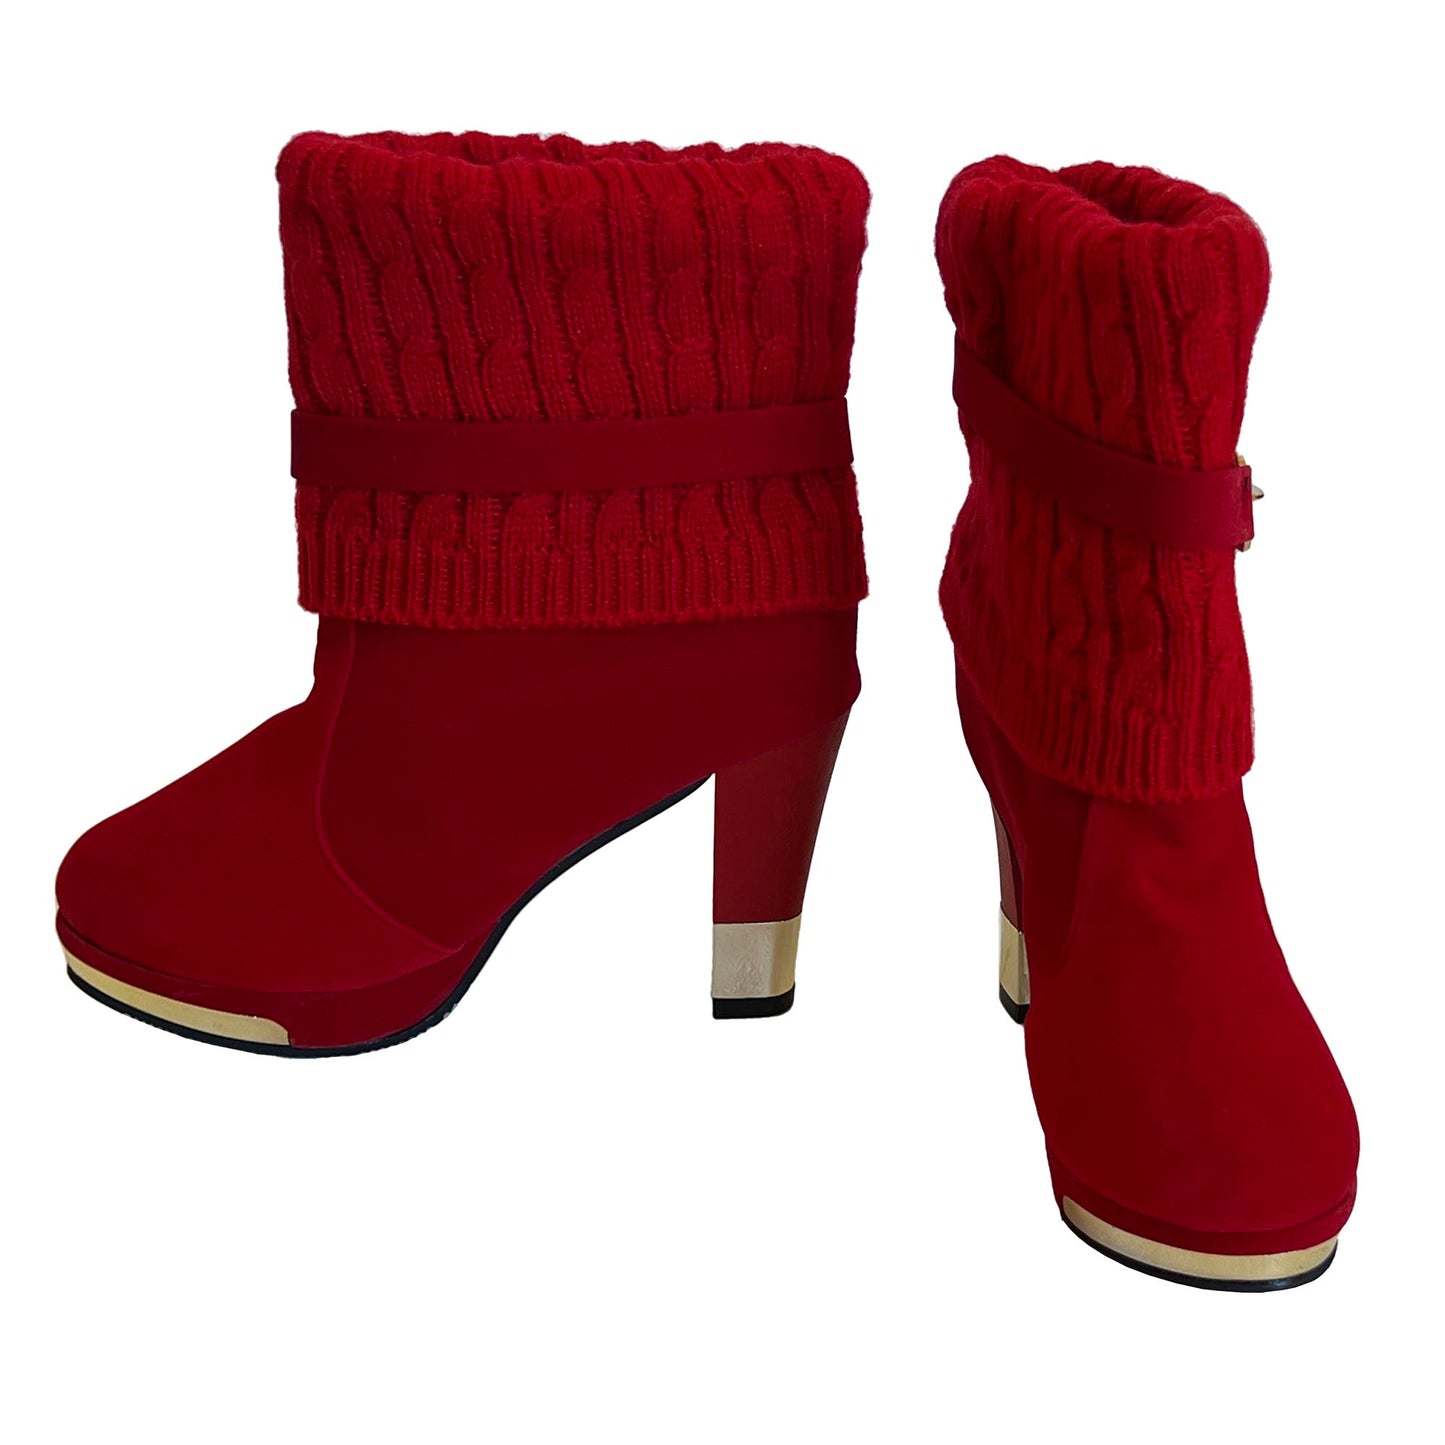 BBLAN-Red-Suede-Boots_Knit-Leg-Warmers_-Gold-Accents.Size-38.-Shop-eBargainsAndDeals.com